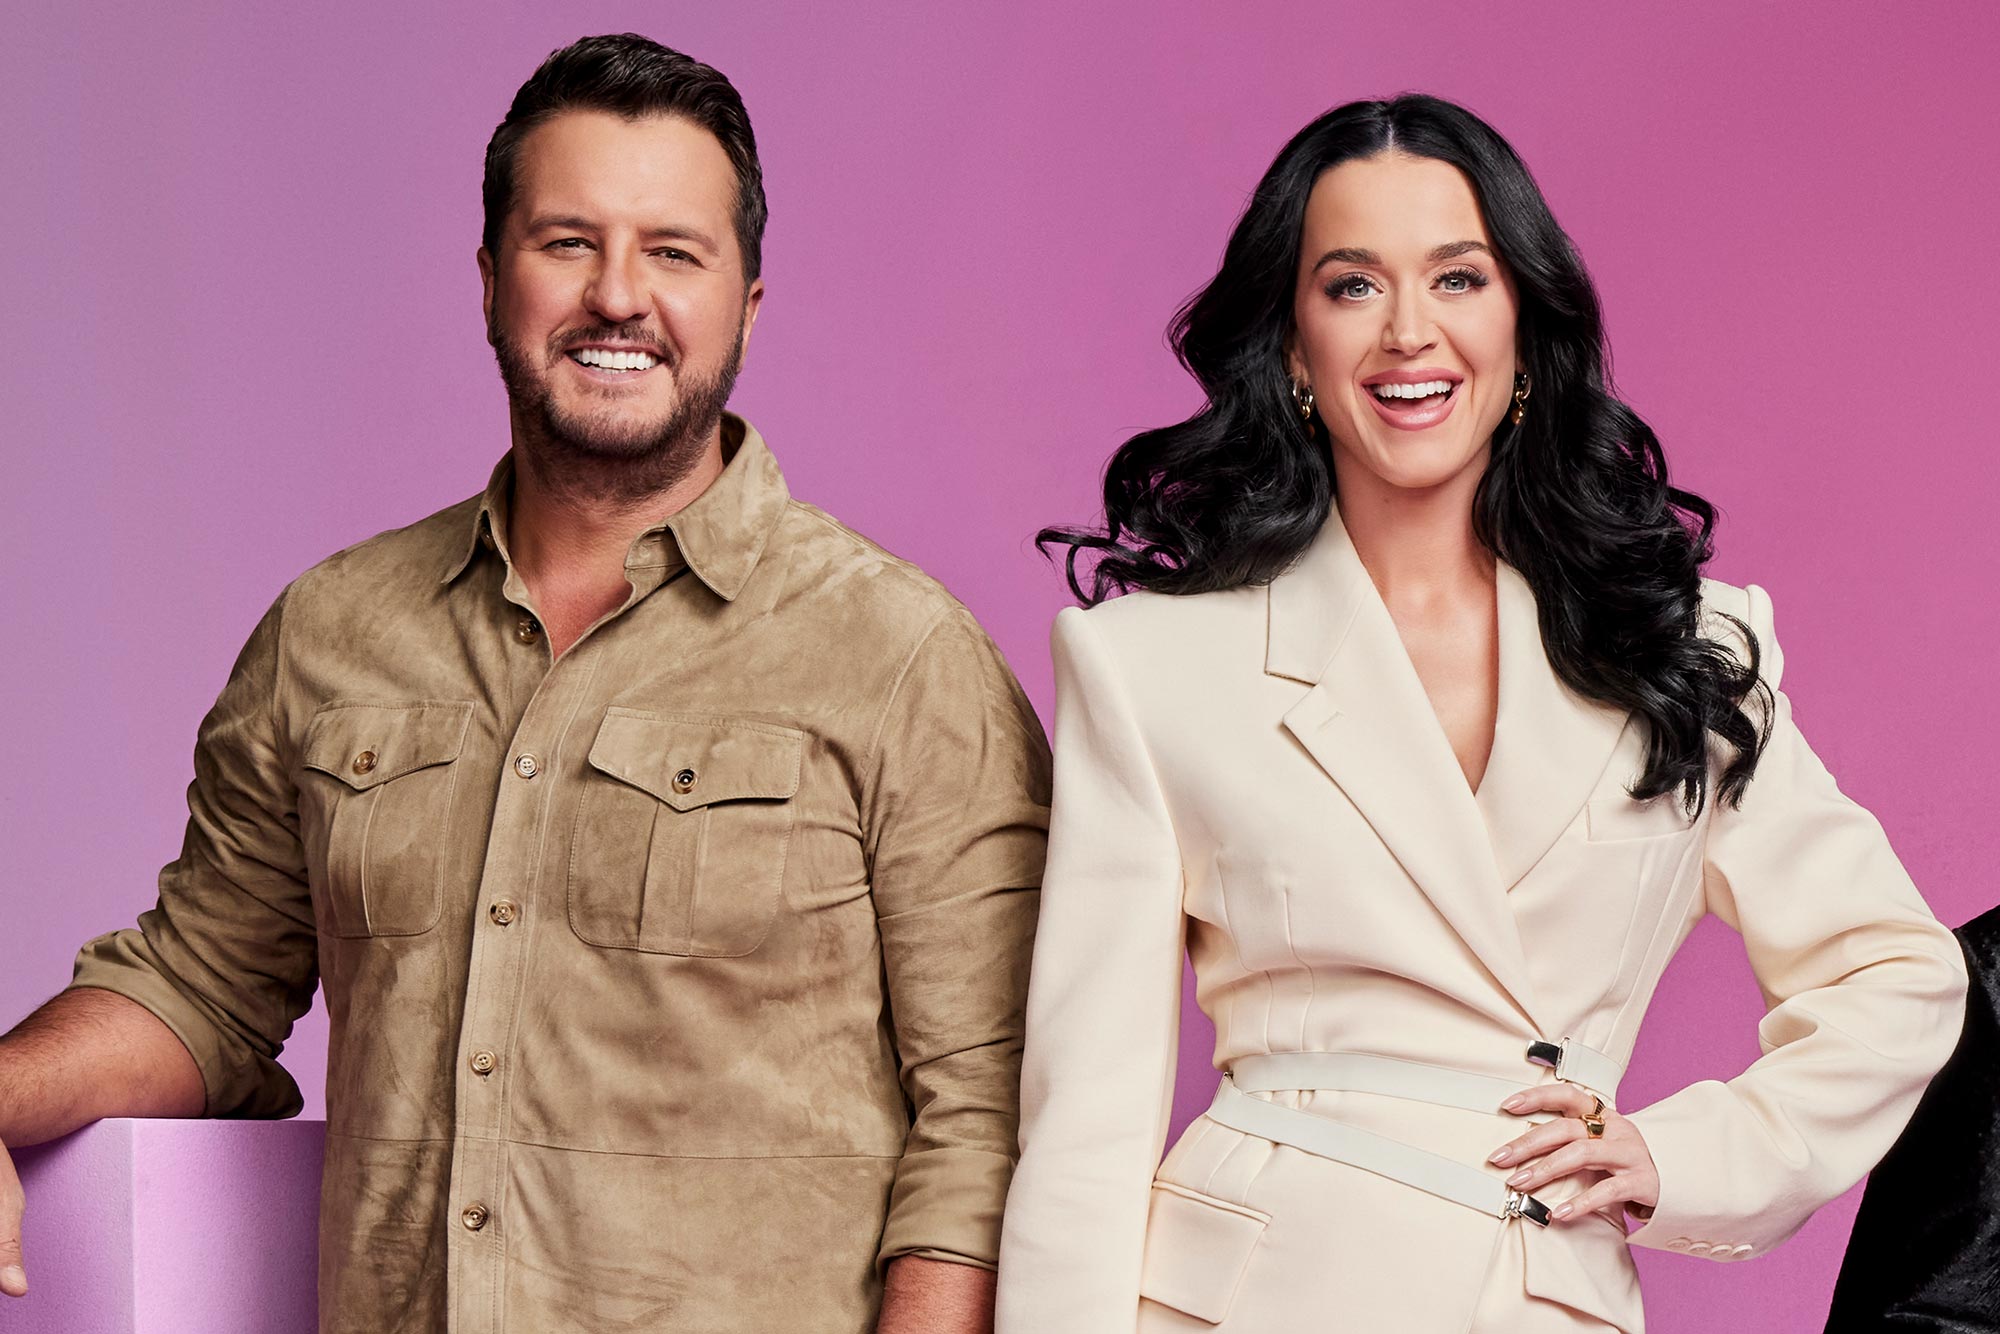 Luke Bryan Teases Possible Katy Perry Replacements on ‘American Idol’